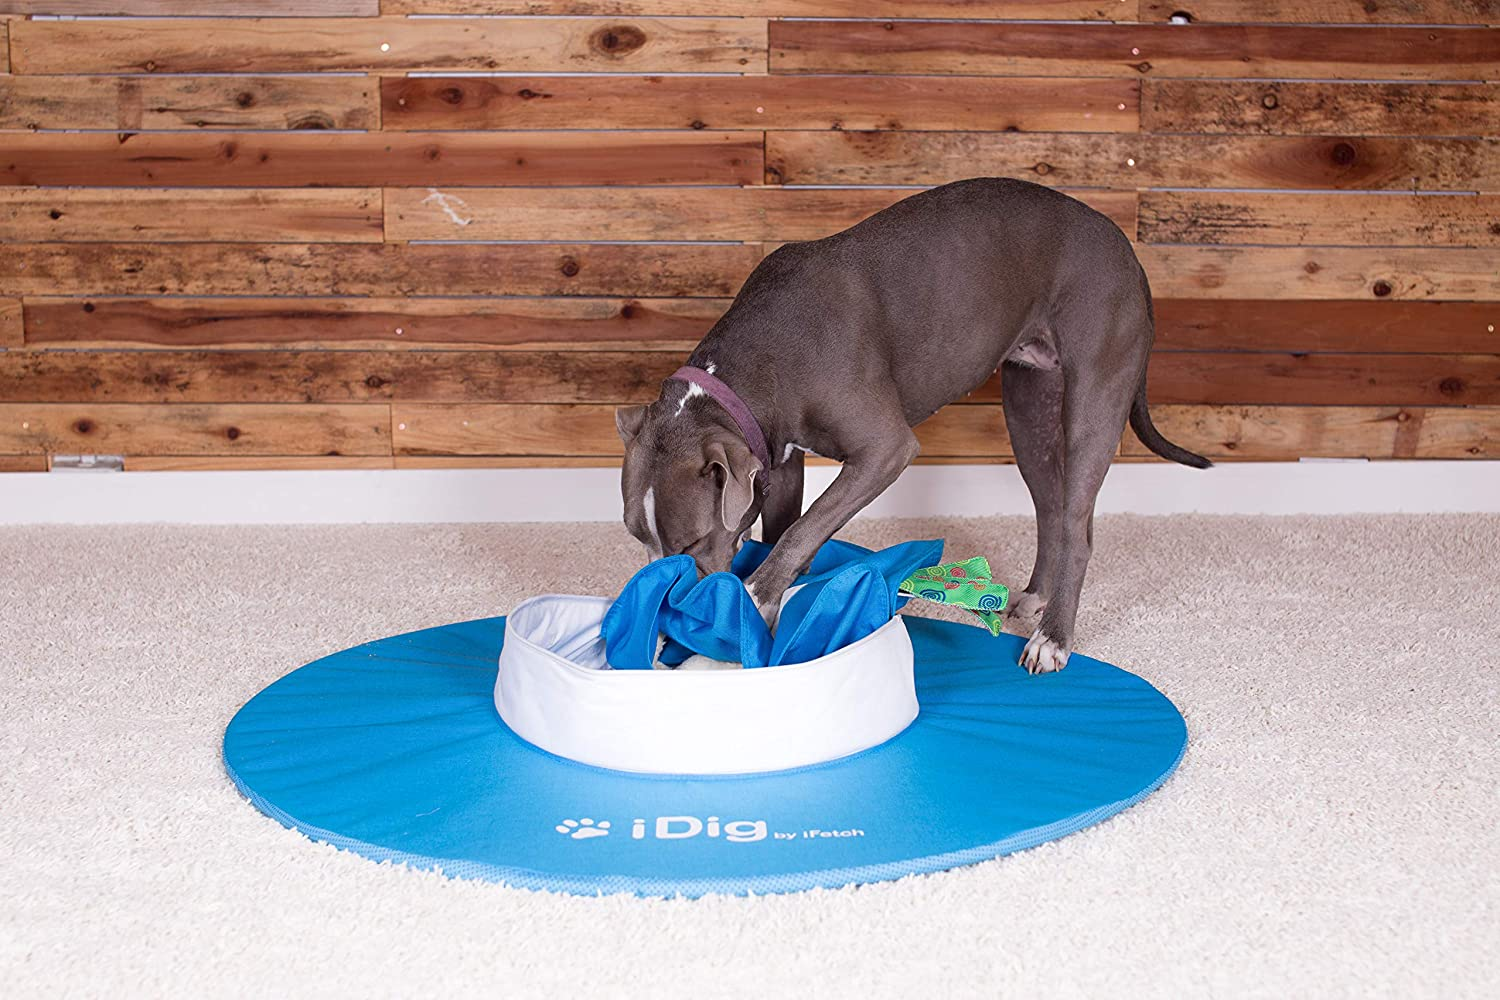 5 Enrichment Ideas for Dogs That Dig